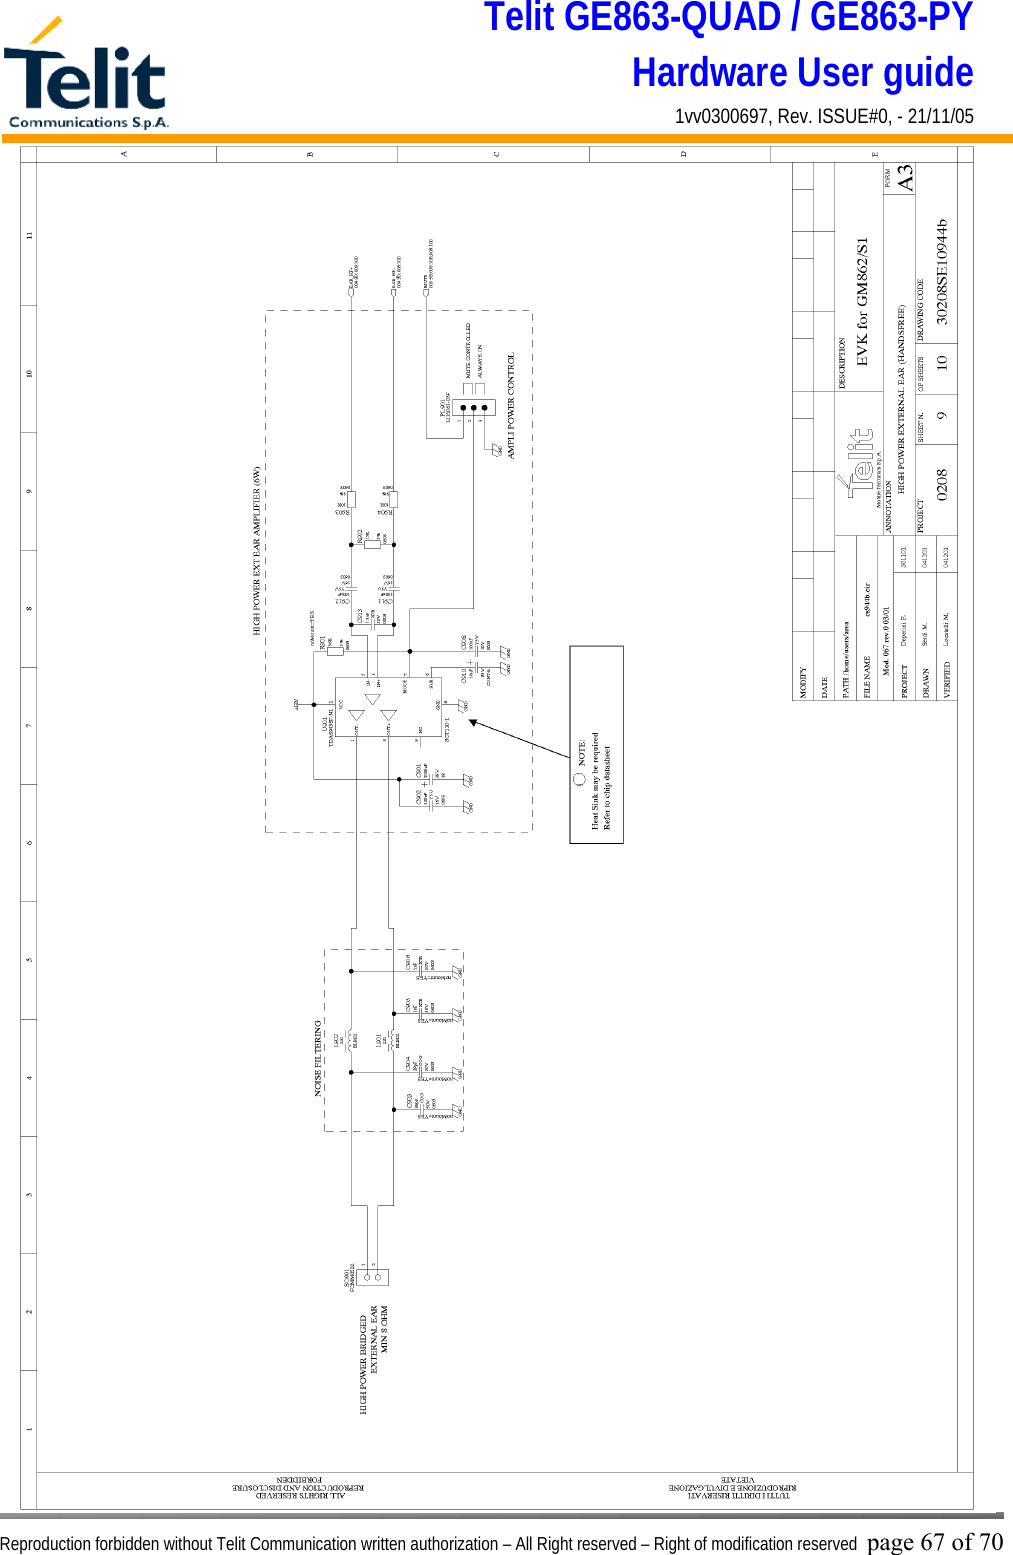 Telit GE863-QUAD / GE863-PY Hardware User guide 1vv0300697, Rev. ISSUE#0, - 21/11/05    Reproduction forbidden without Telit Communication written authorization – All Right reserved – Right of modification reserved page 67 of 70 